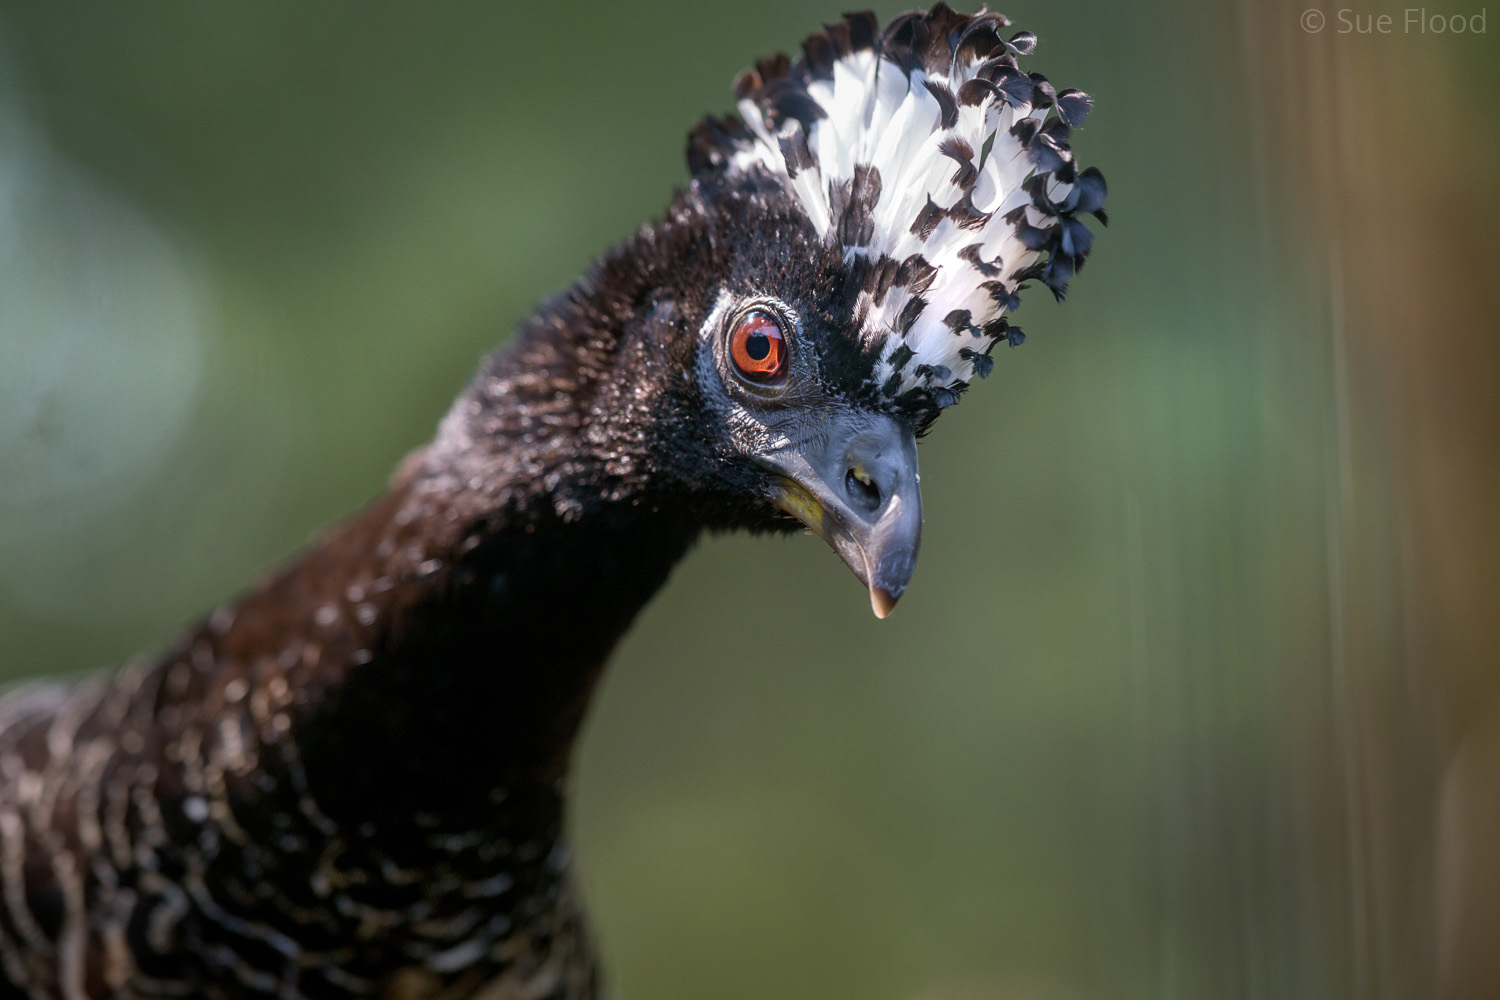 Bare-faced Currasow, Brazil